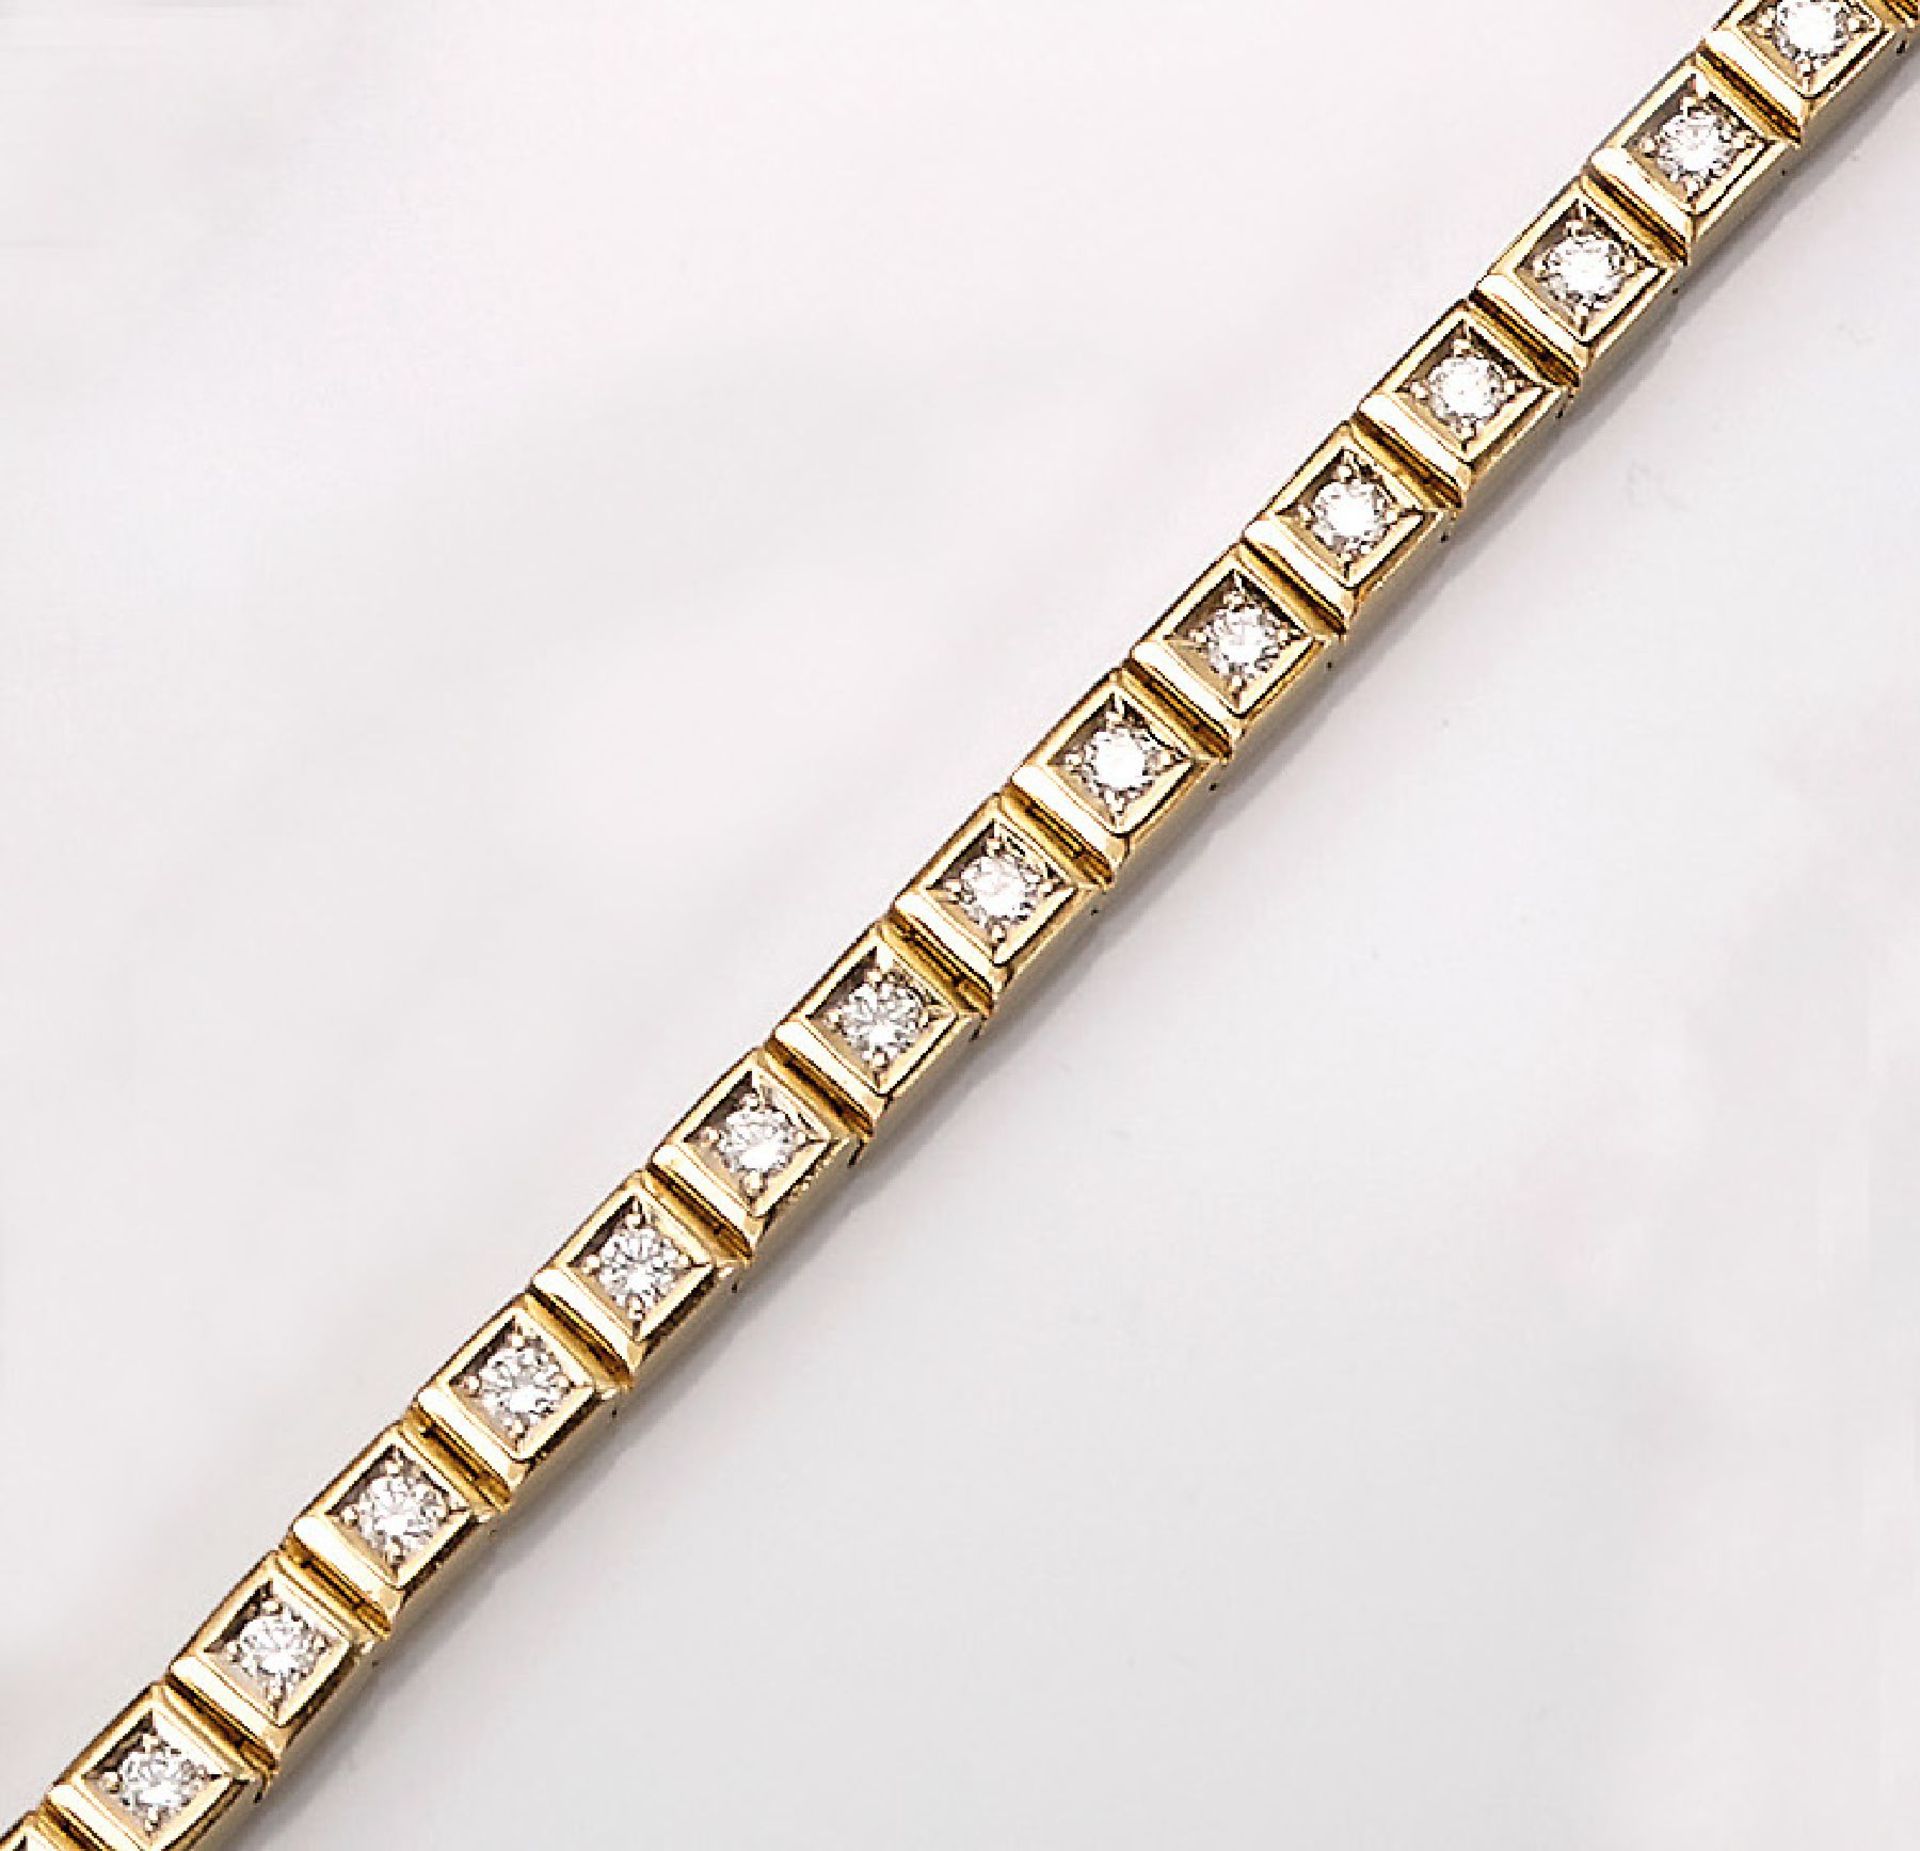 18 kt gold rivierebracelet with brilliants ,YG 750/000, 31 brilliants total approx. 2.20 ct Top